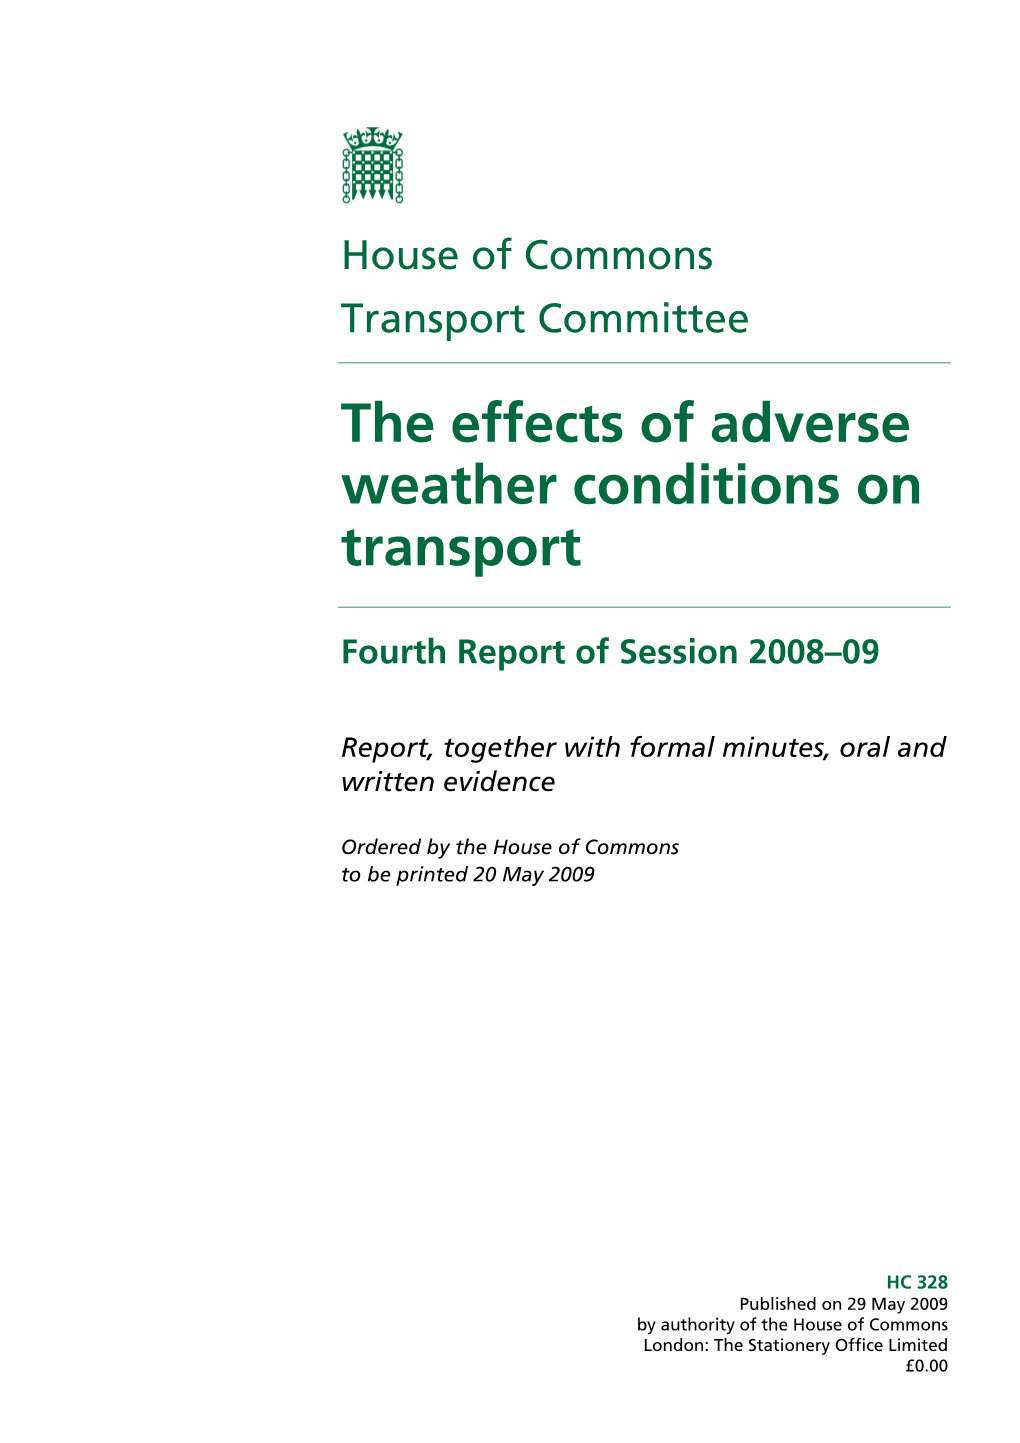 The Effects of Adverse Weather Conditions on Transport